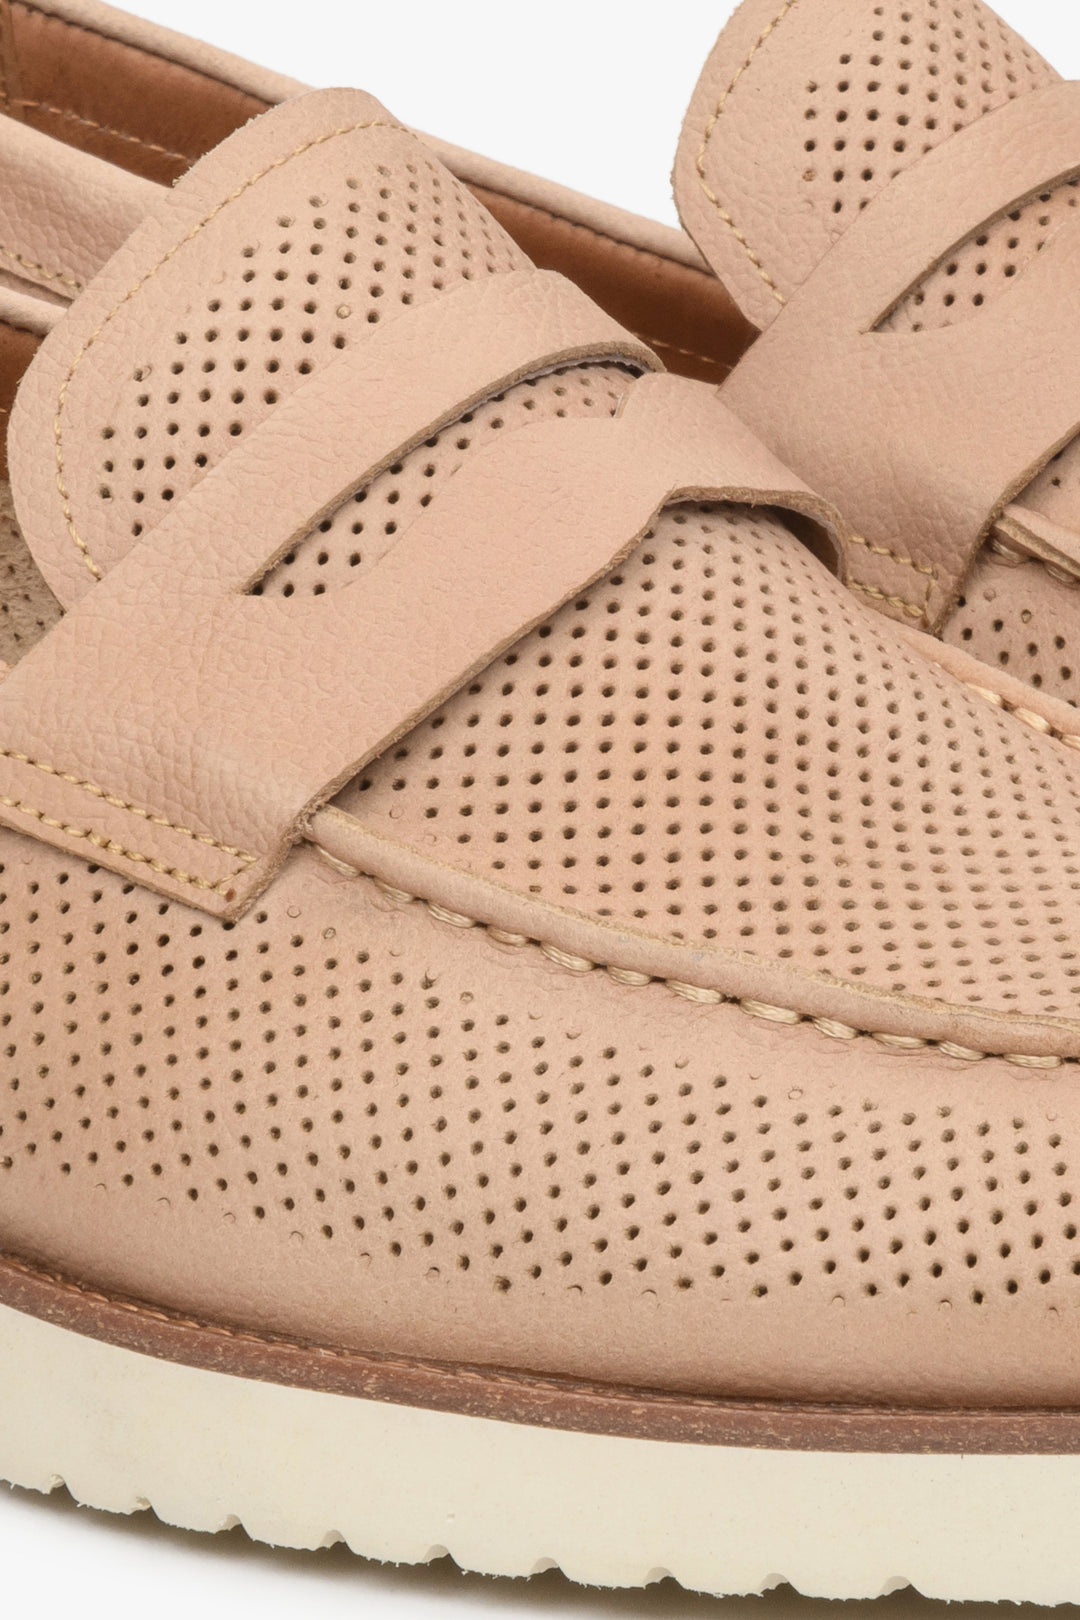 Men's beige penny loafers with perforation - close-up on details.